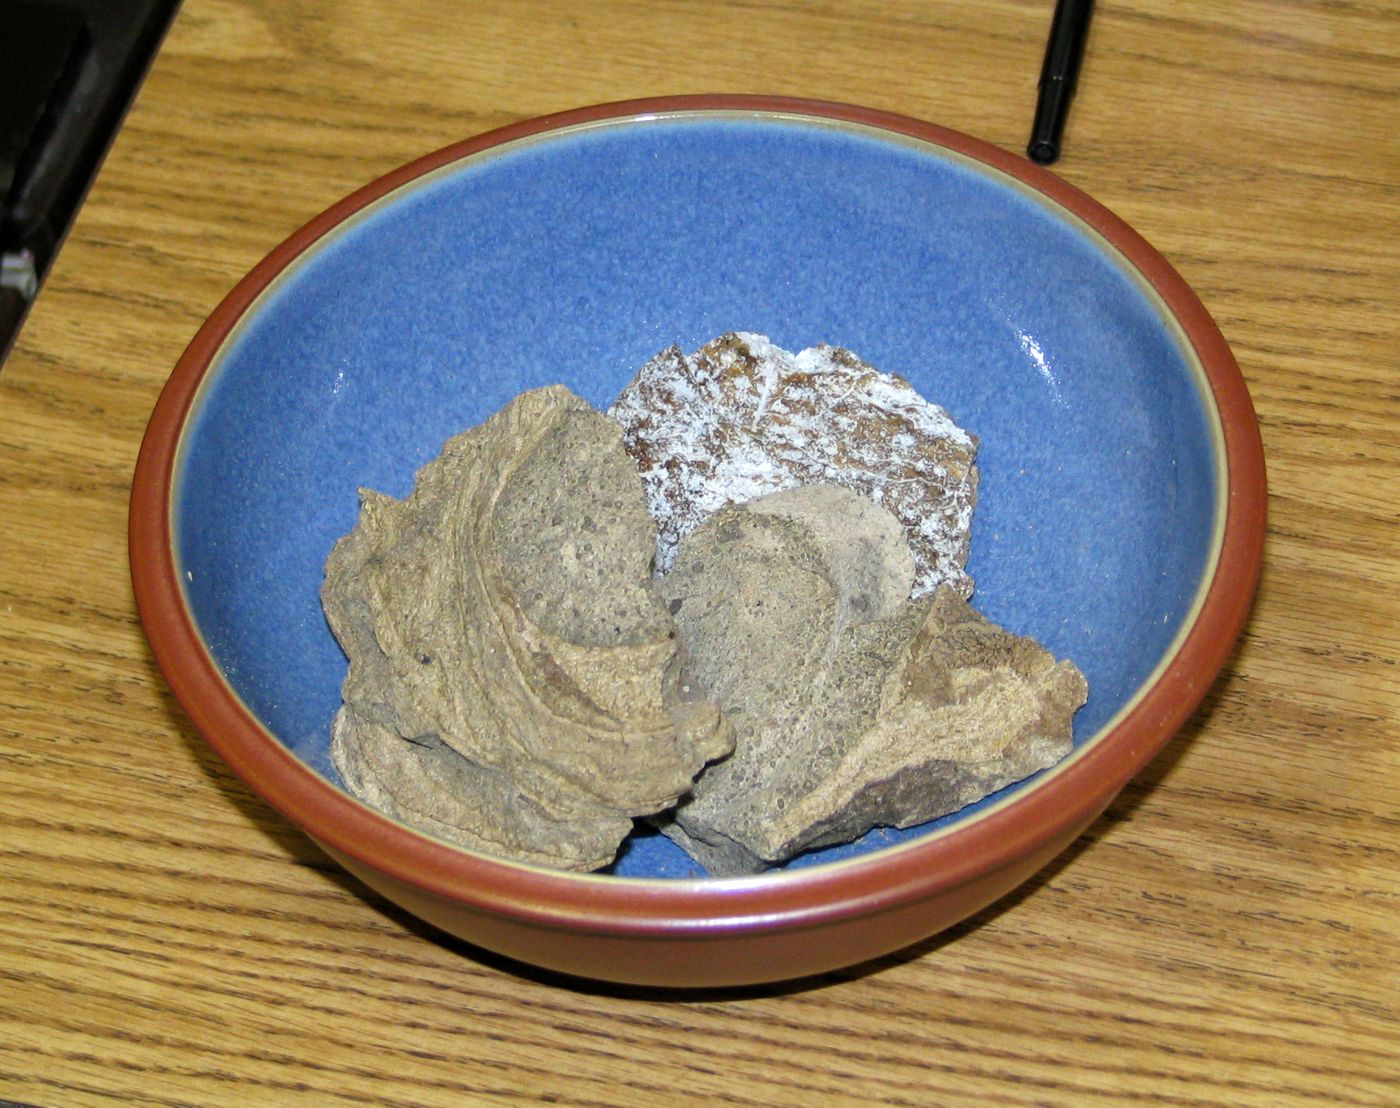 Ambergris doesn't really look like anything special, but perfurm makers say it's useful for retaining scents.